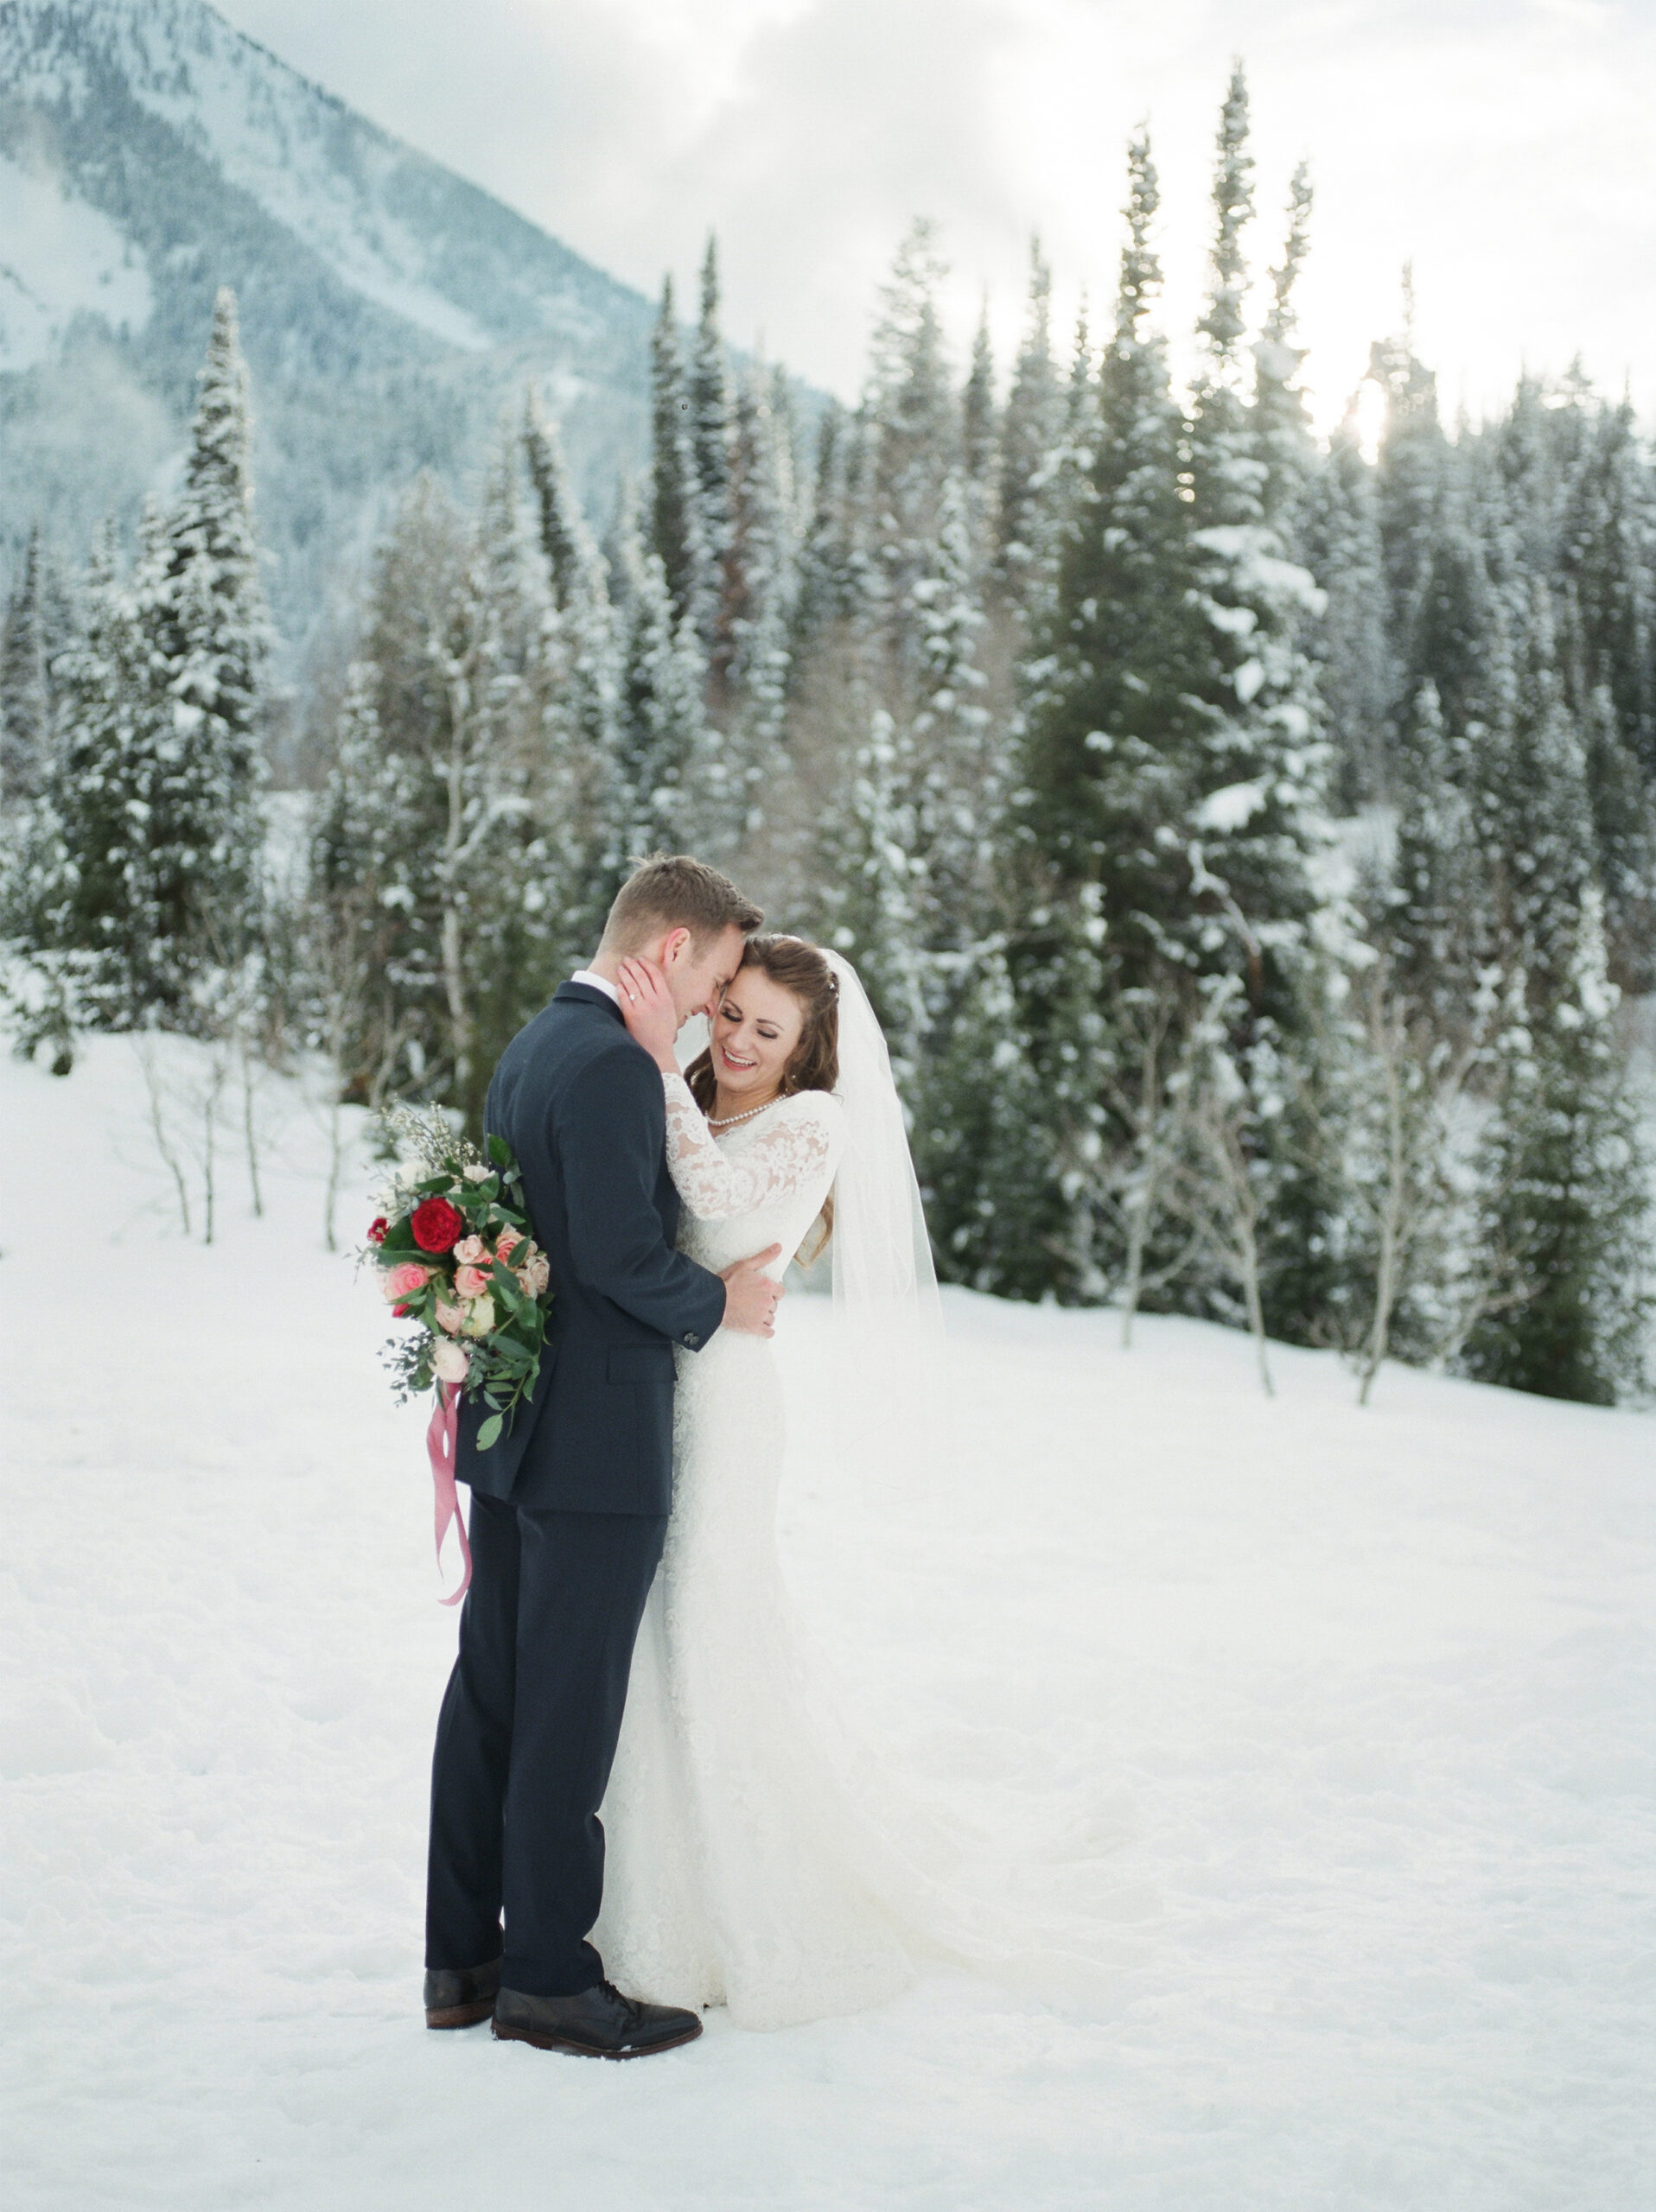 Utah winter photographer tips for bridals in the snow